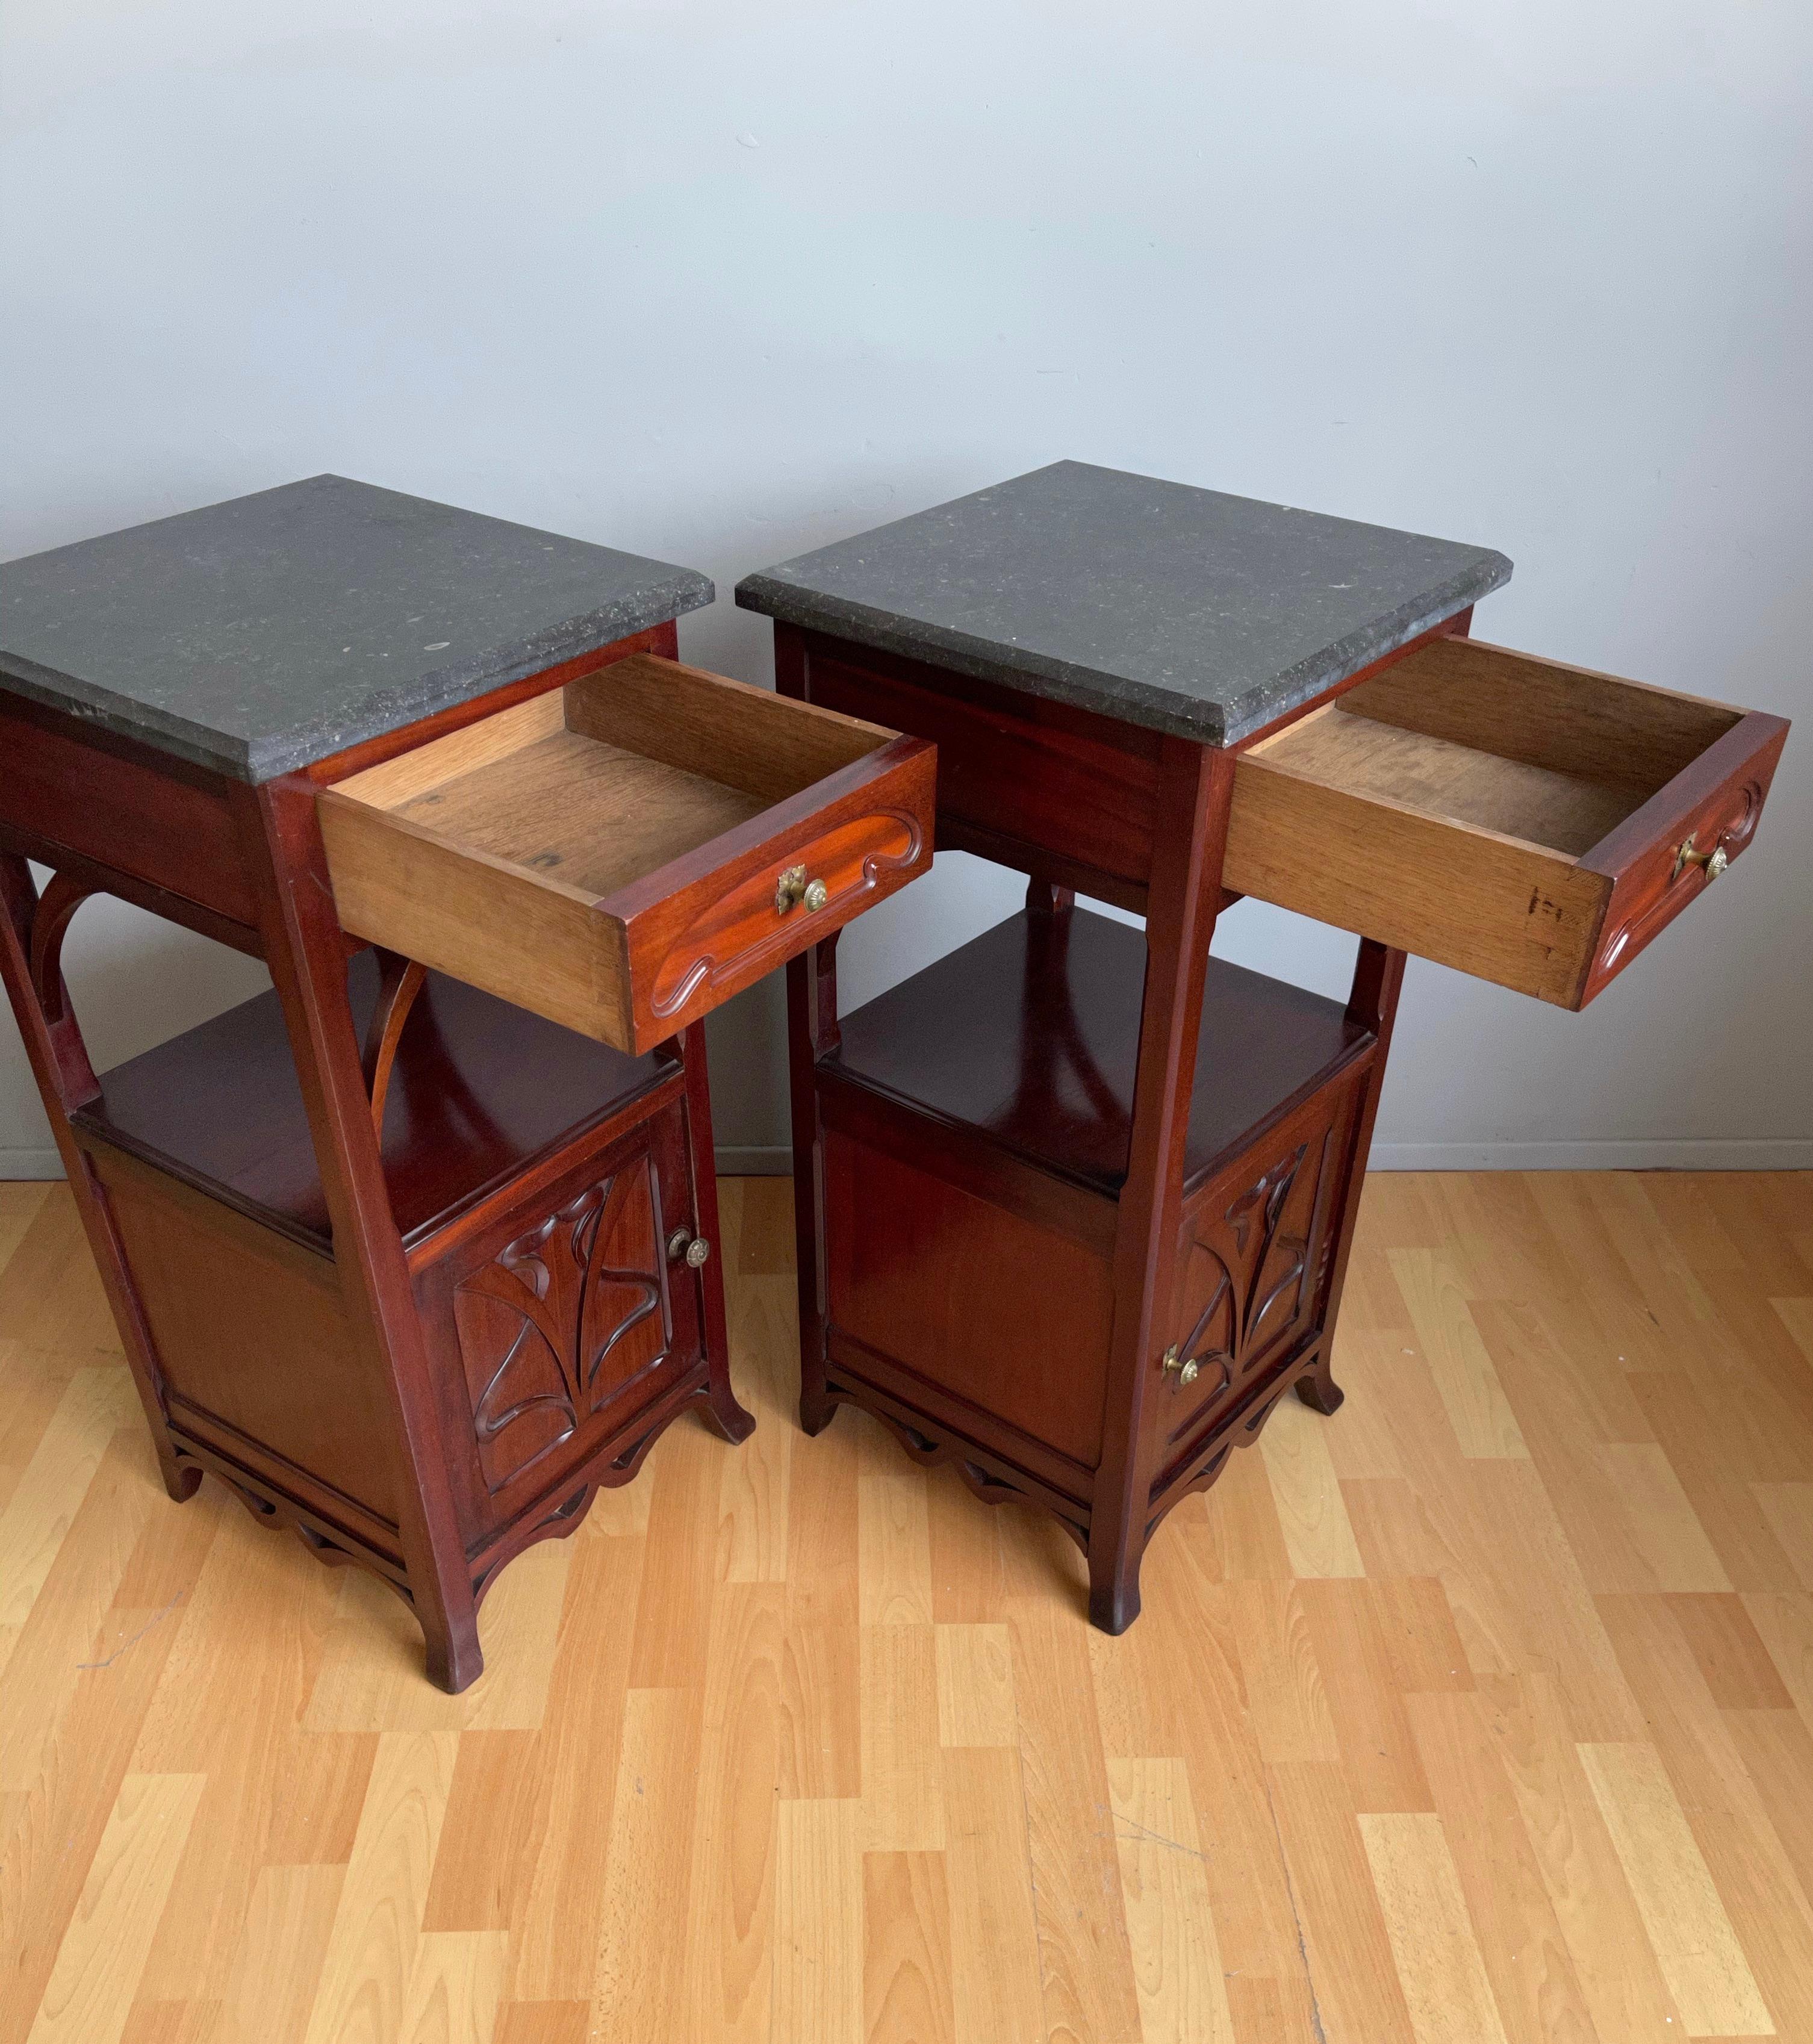 Hand-Carved Pair of Solid Wooden Art Nouveau Bedside Cabinets / Nightstands with Marble Top